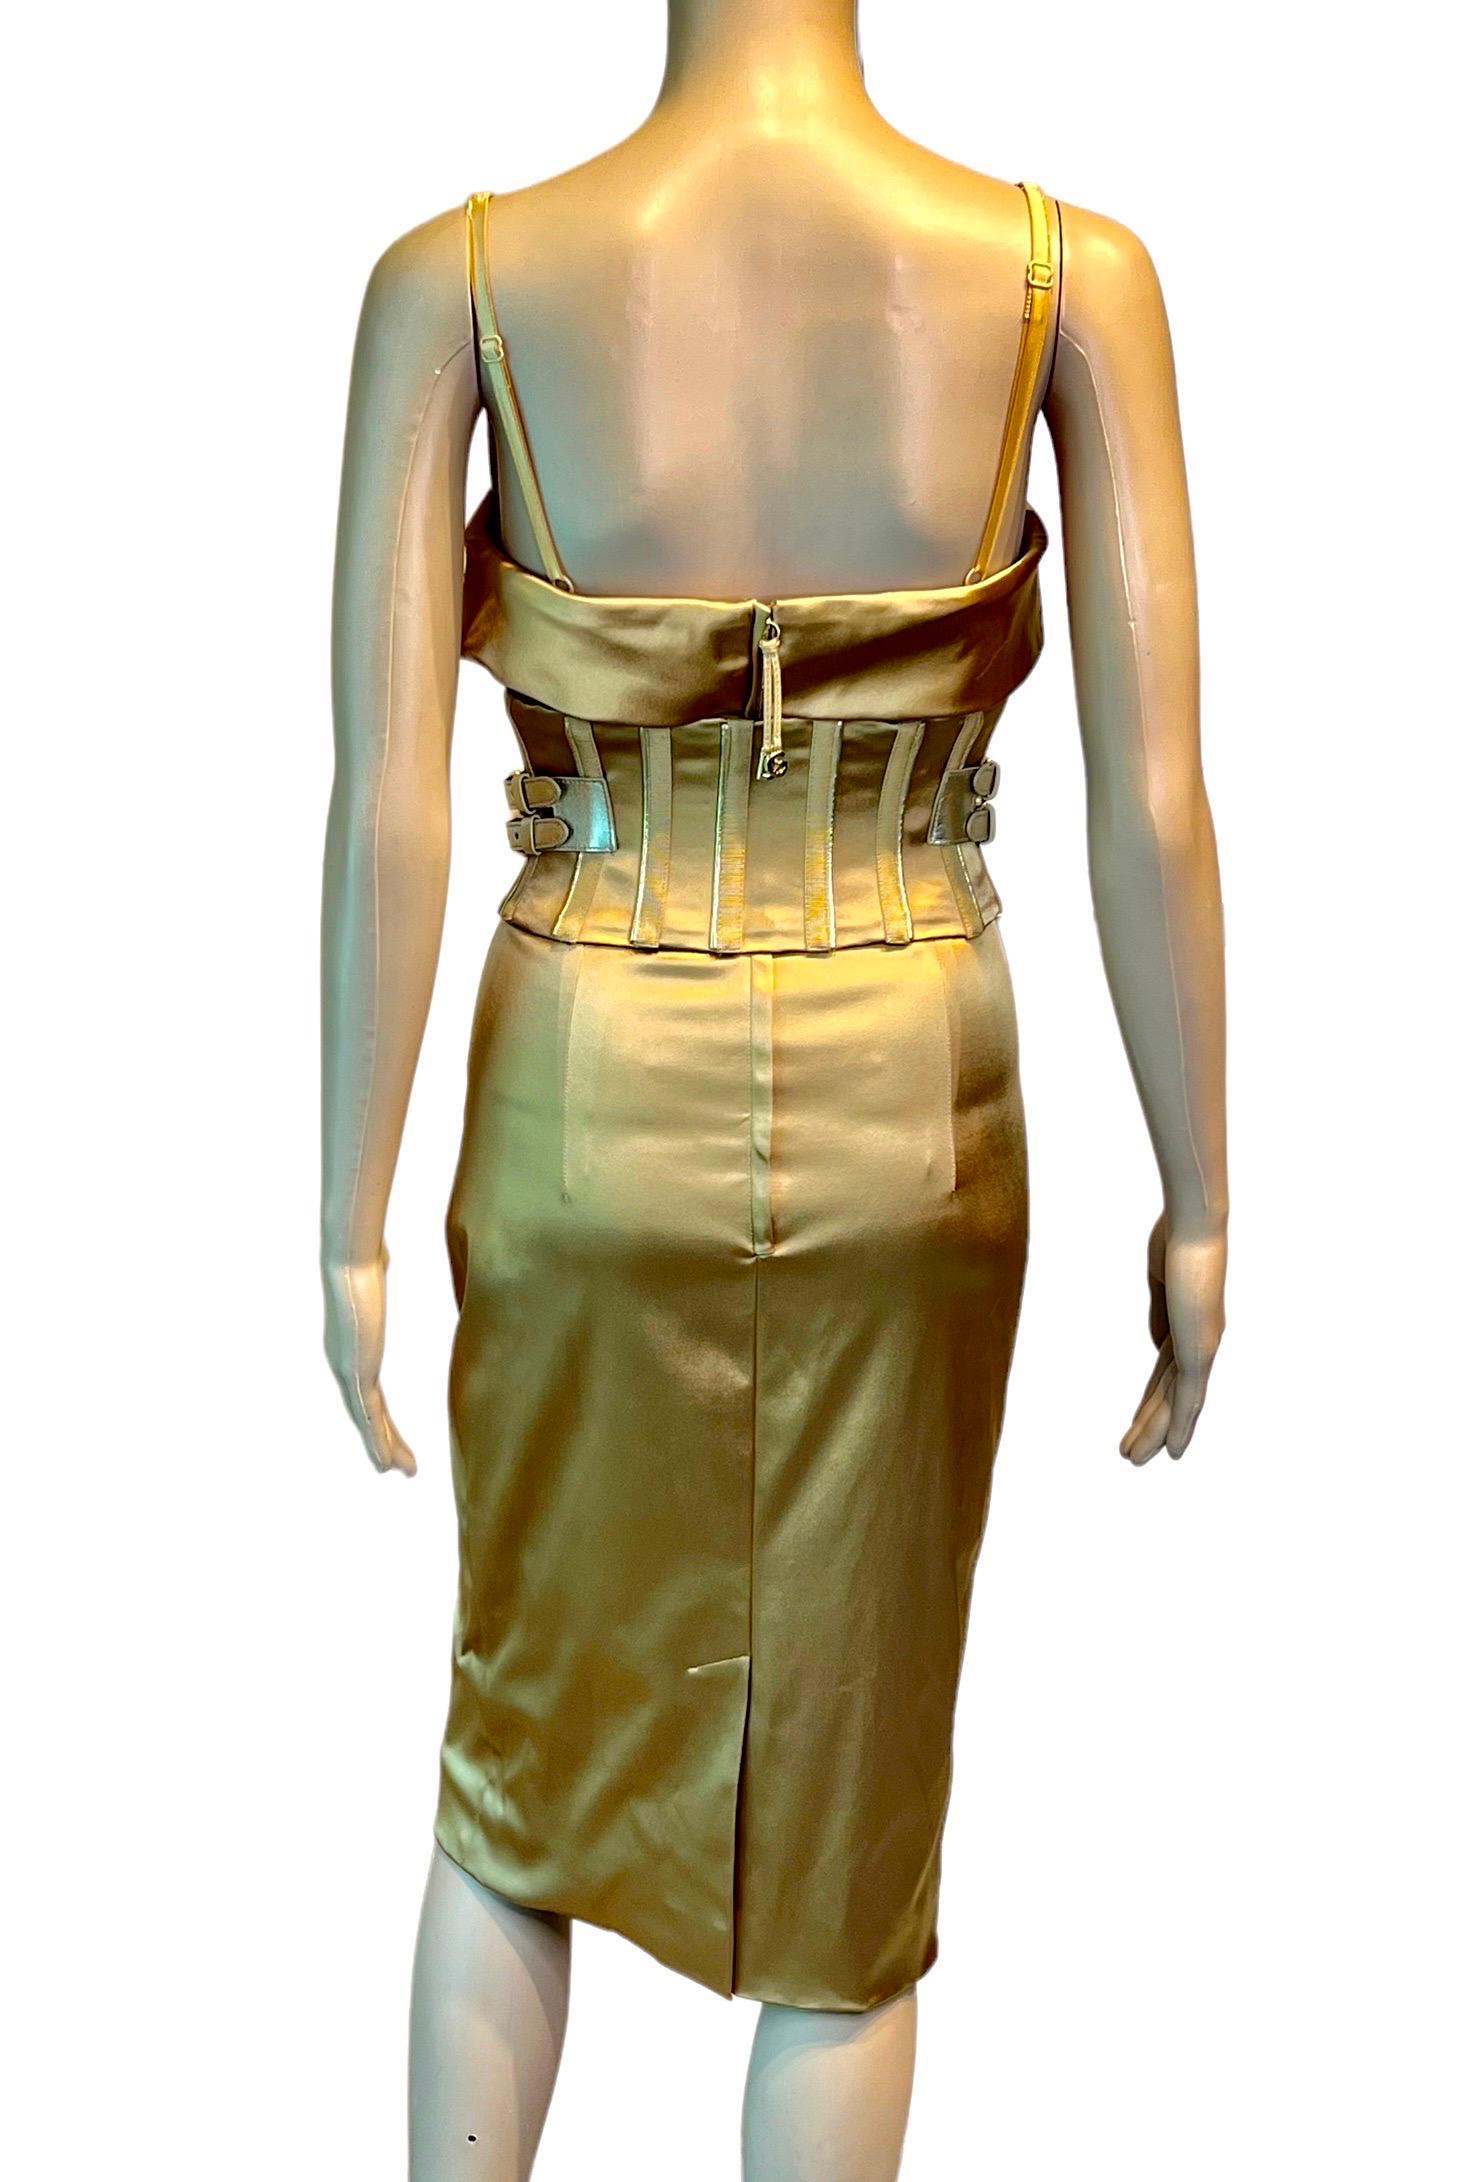 Dolce & Gabbana S/S 2007 Corset Belted Bra Bustier Bodycon Gold Acetate Dress In Excellent Condition For Sale In Naples, FL